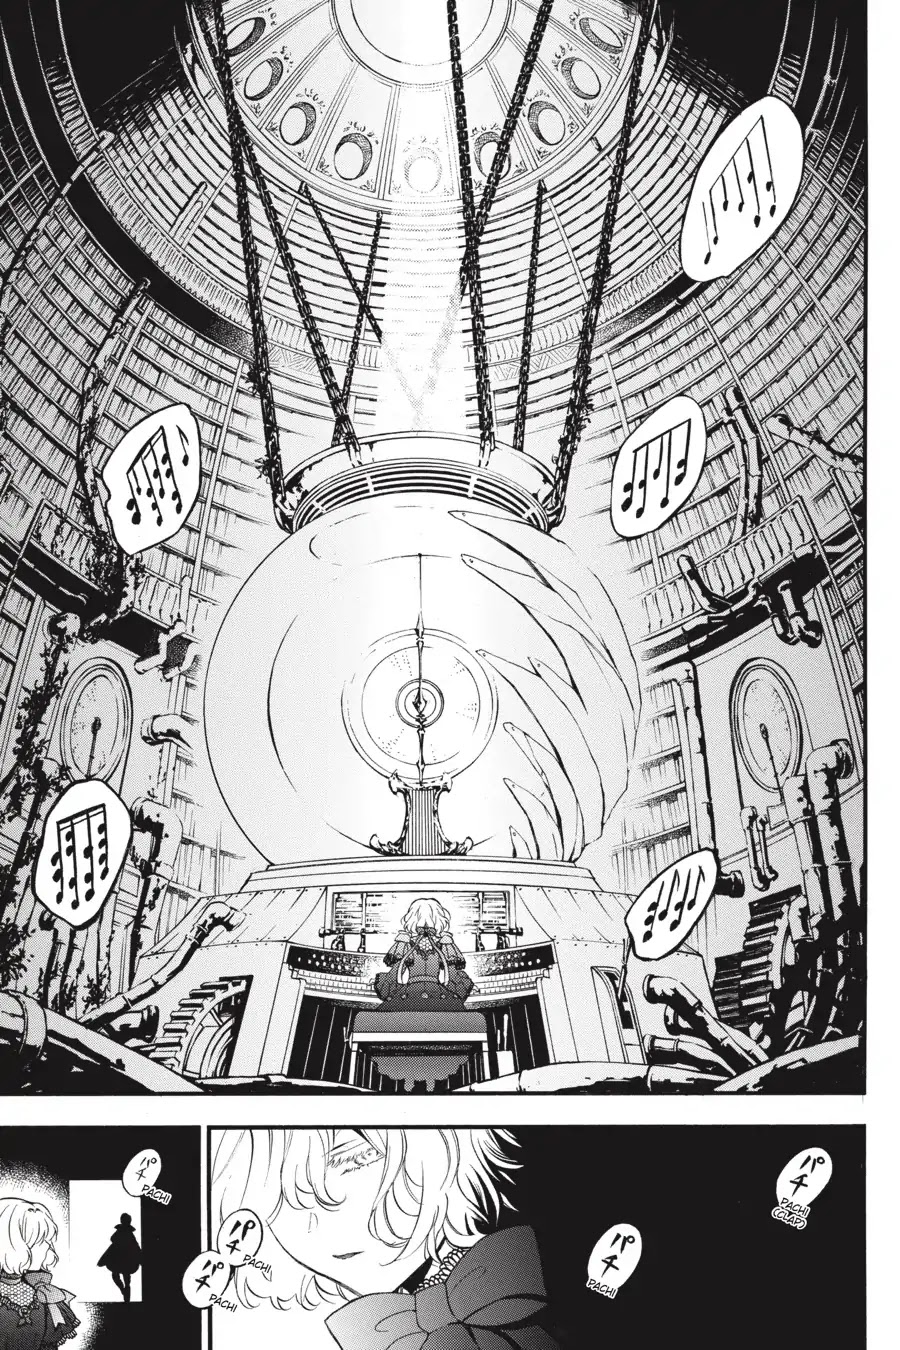 Vanitas no Shuki Chapter 37: Mémoire 37: Hands that Touch a Nightmare: Vengeance